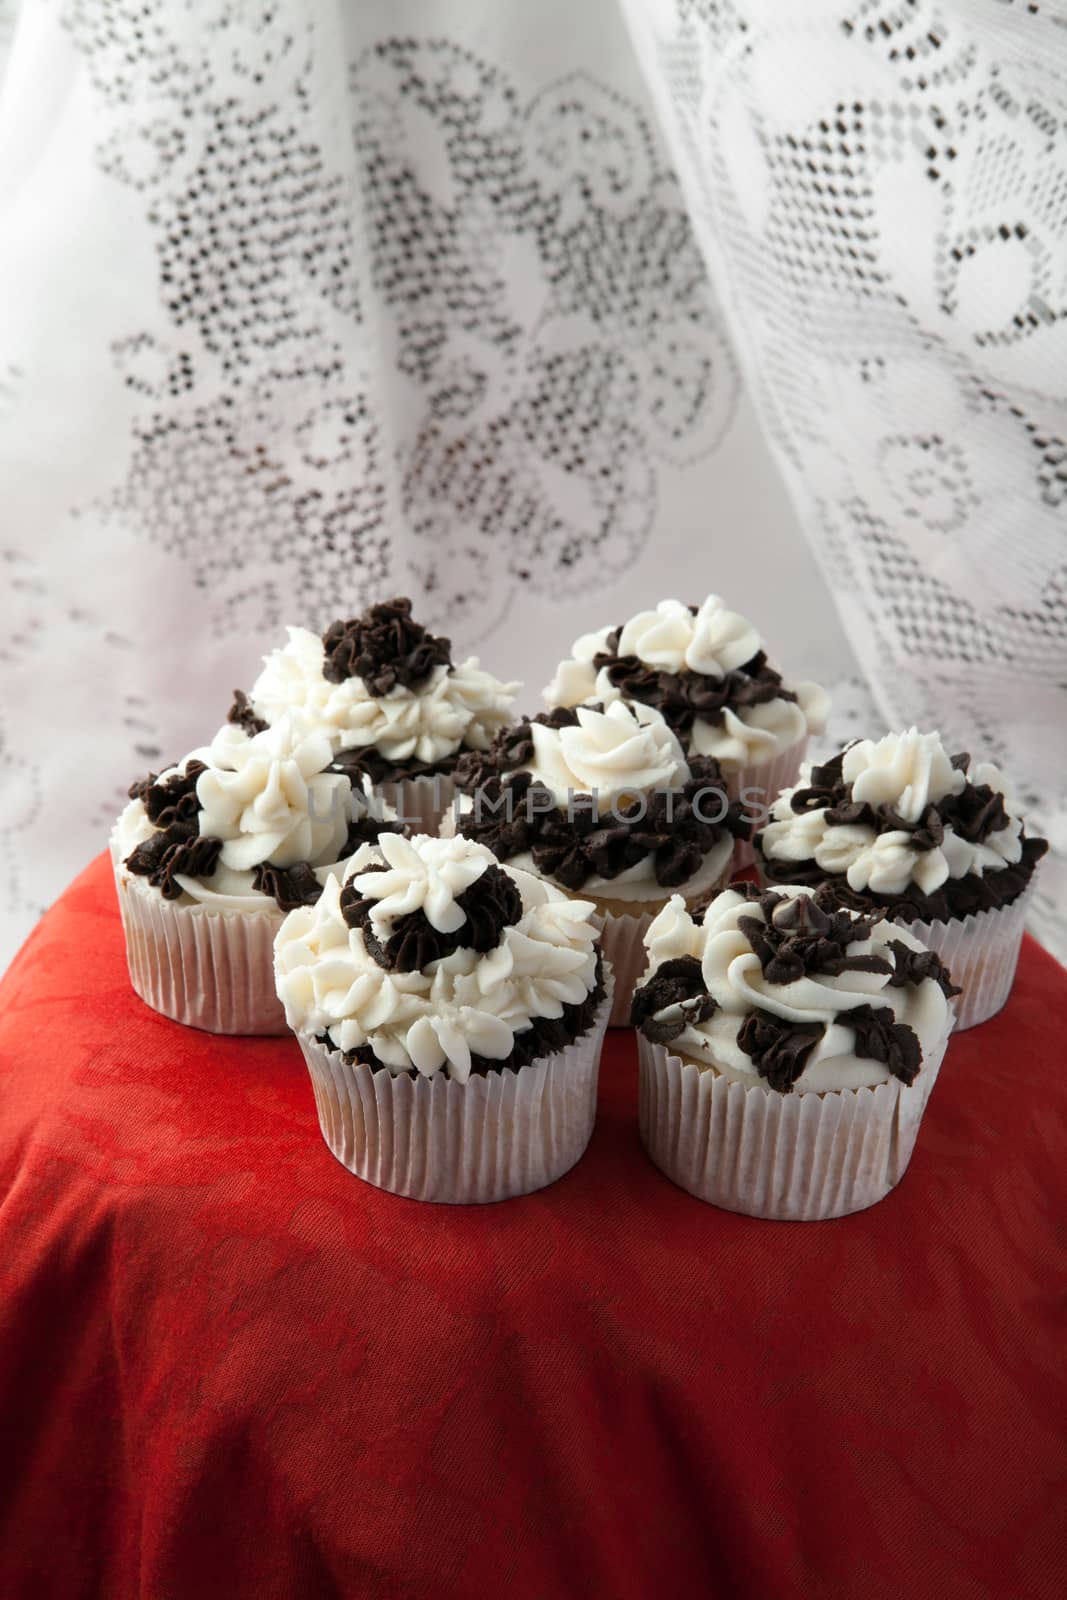 Decadent Gourmet Cupcakes by graficallyminded